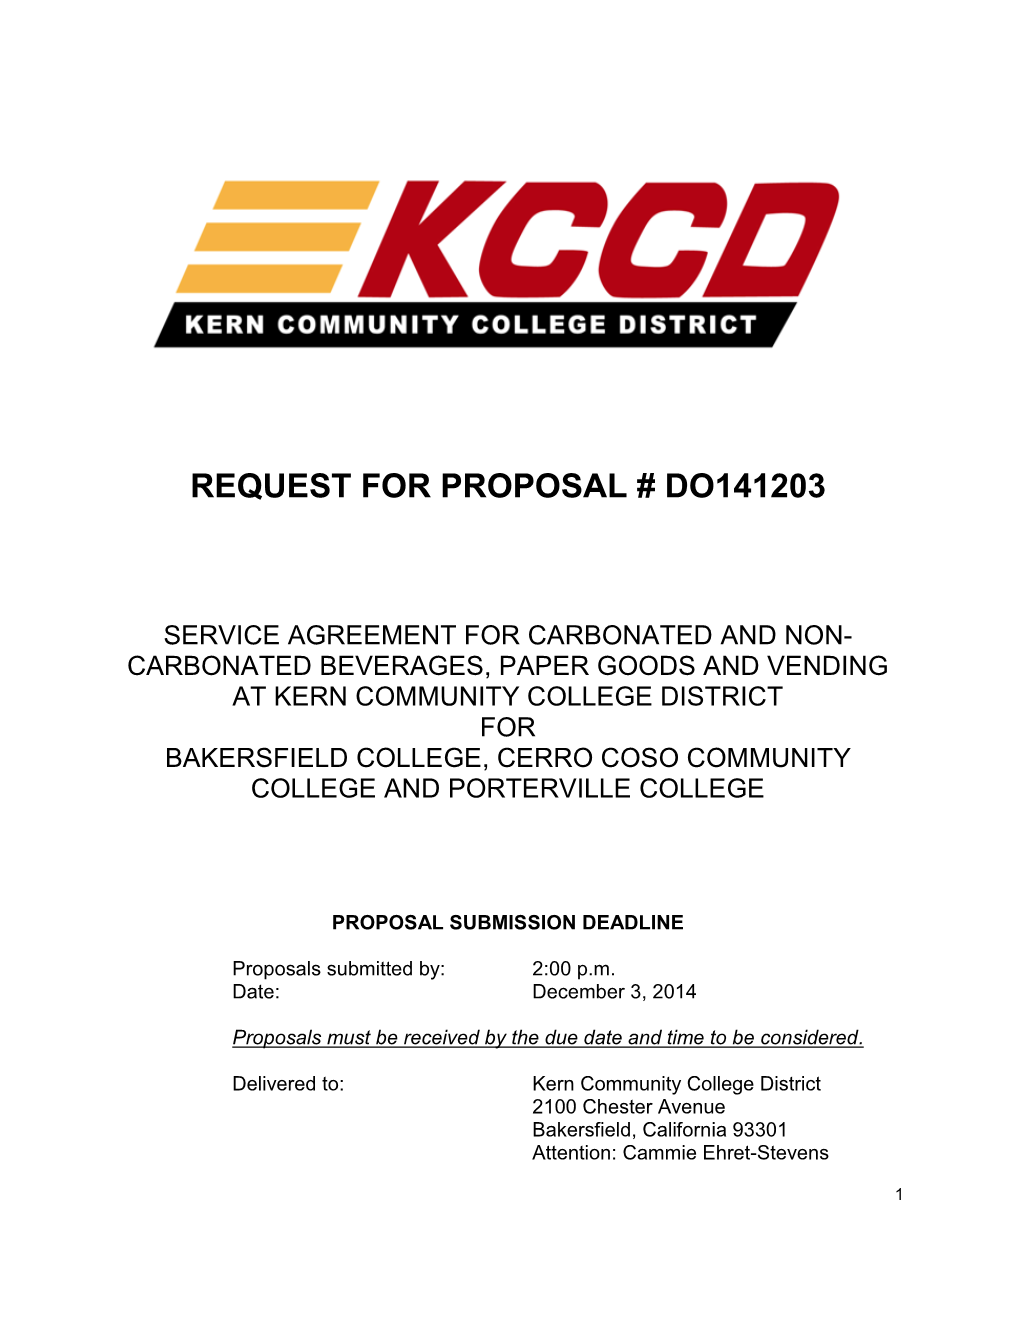 Request for Proposal # Do141203